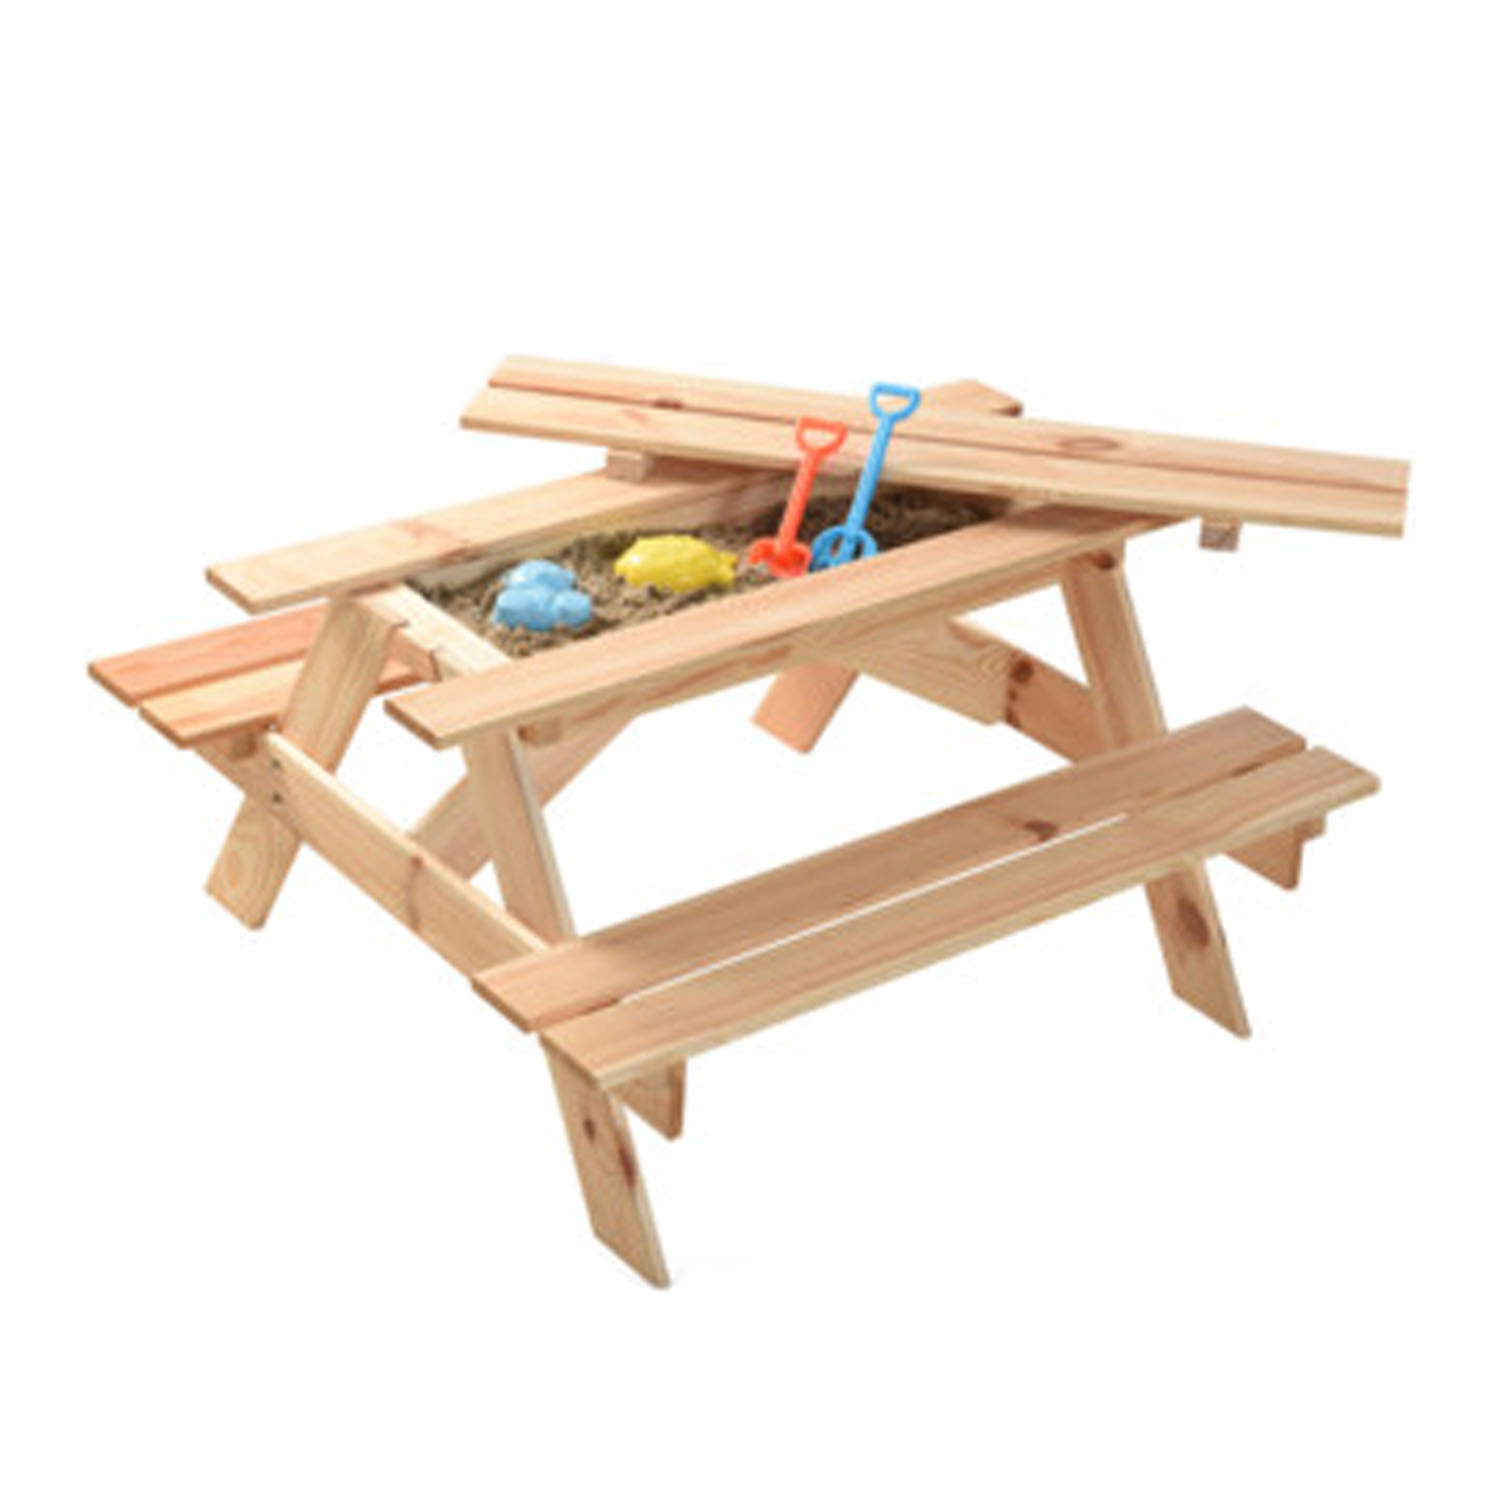 continue Mainstream Green Wooden Picnic Table with Mini Sandpit | Thimble Toys